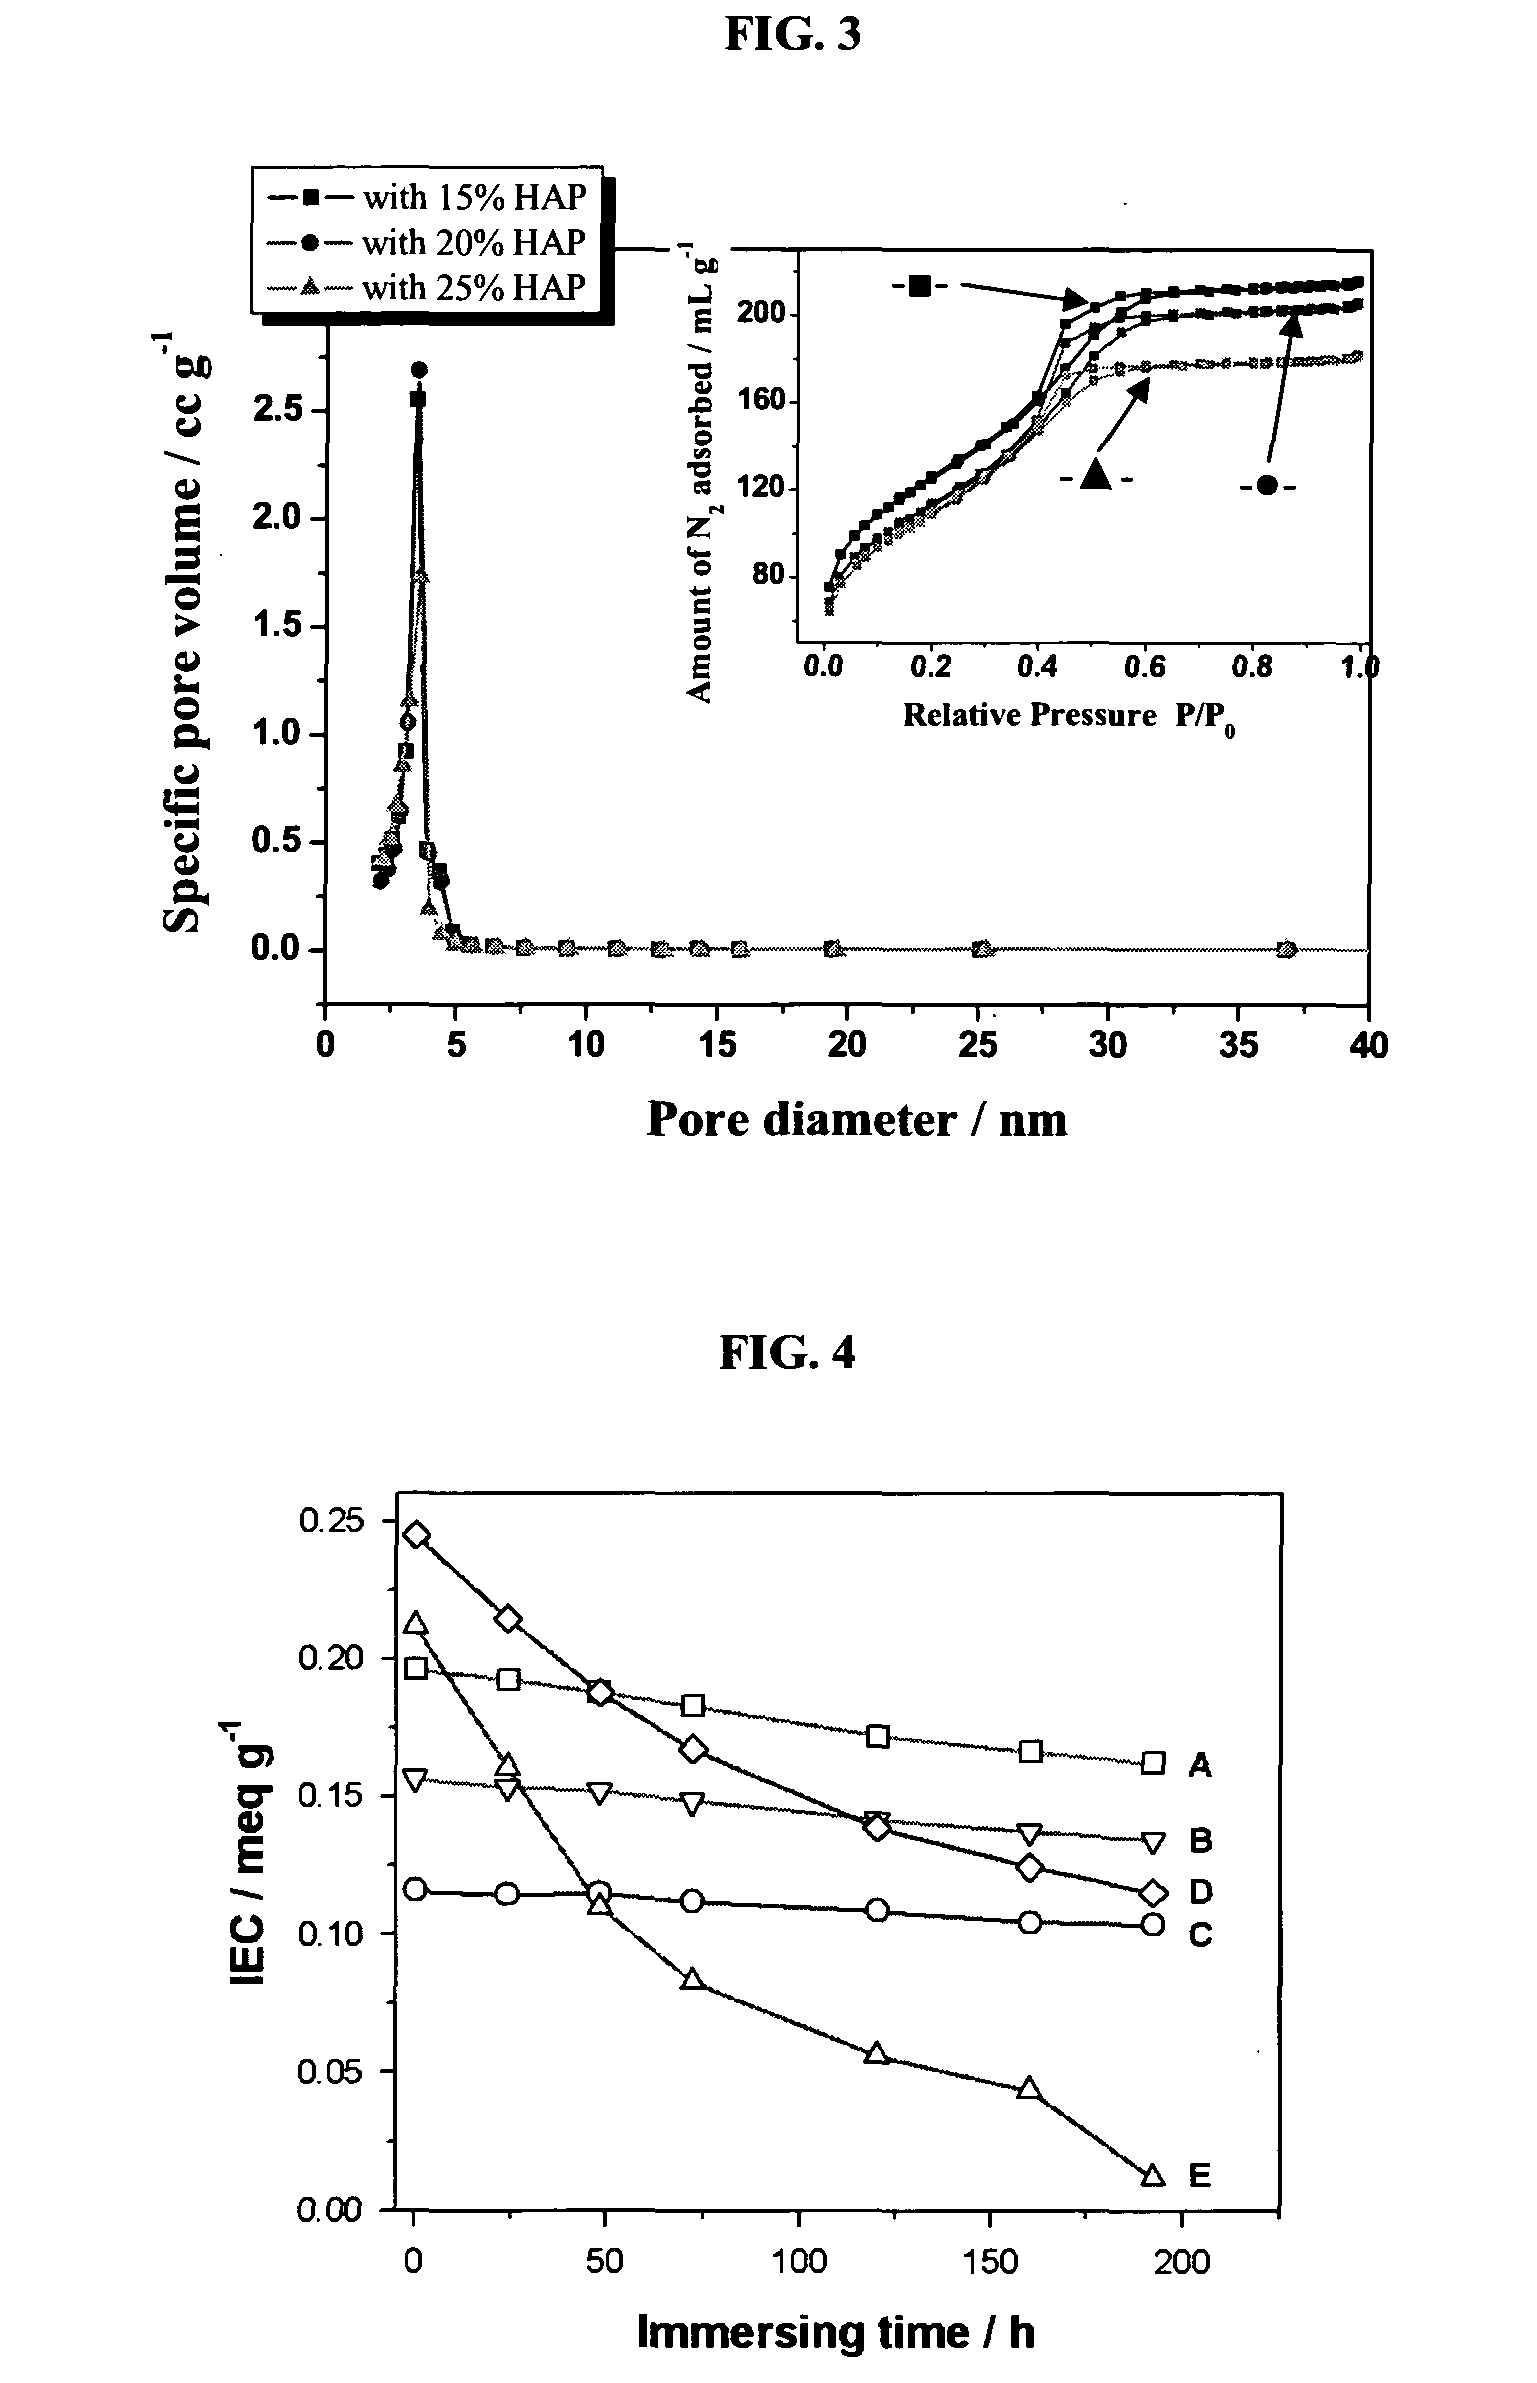 Proton exchange membrane for fuel cell applications